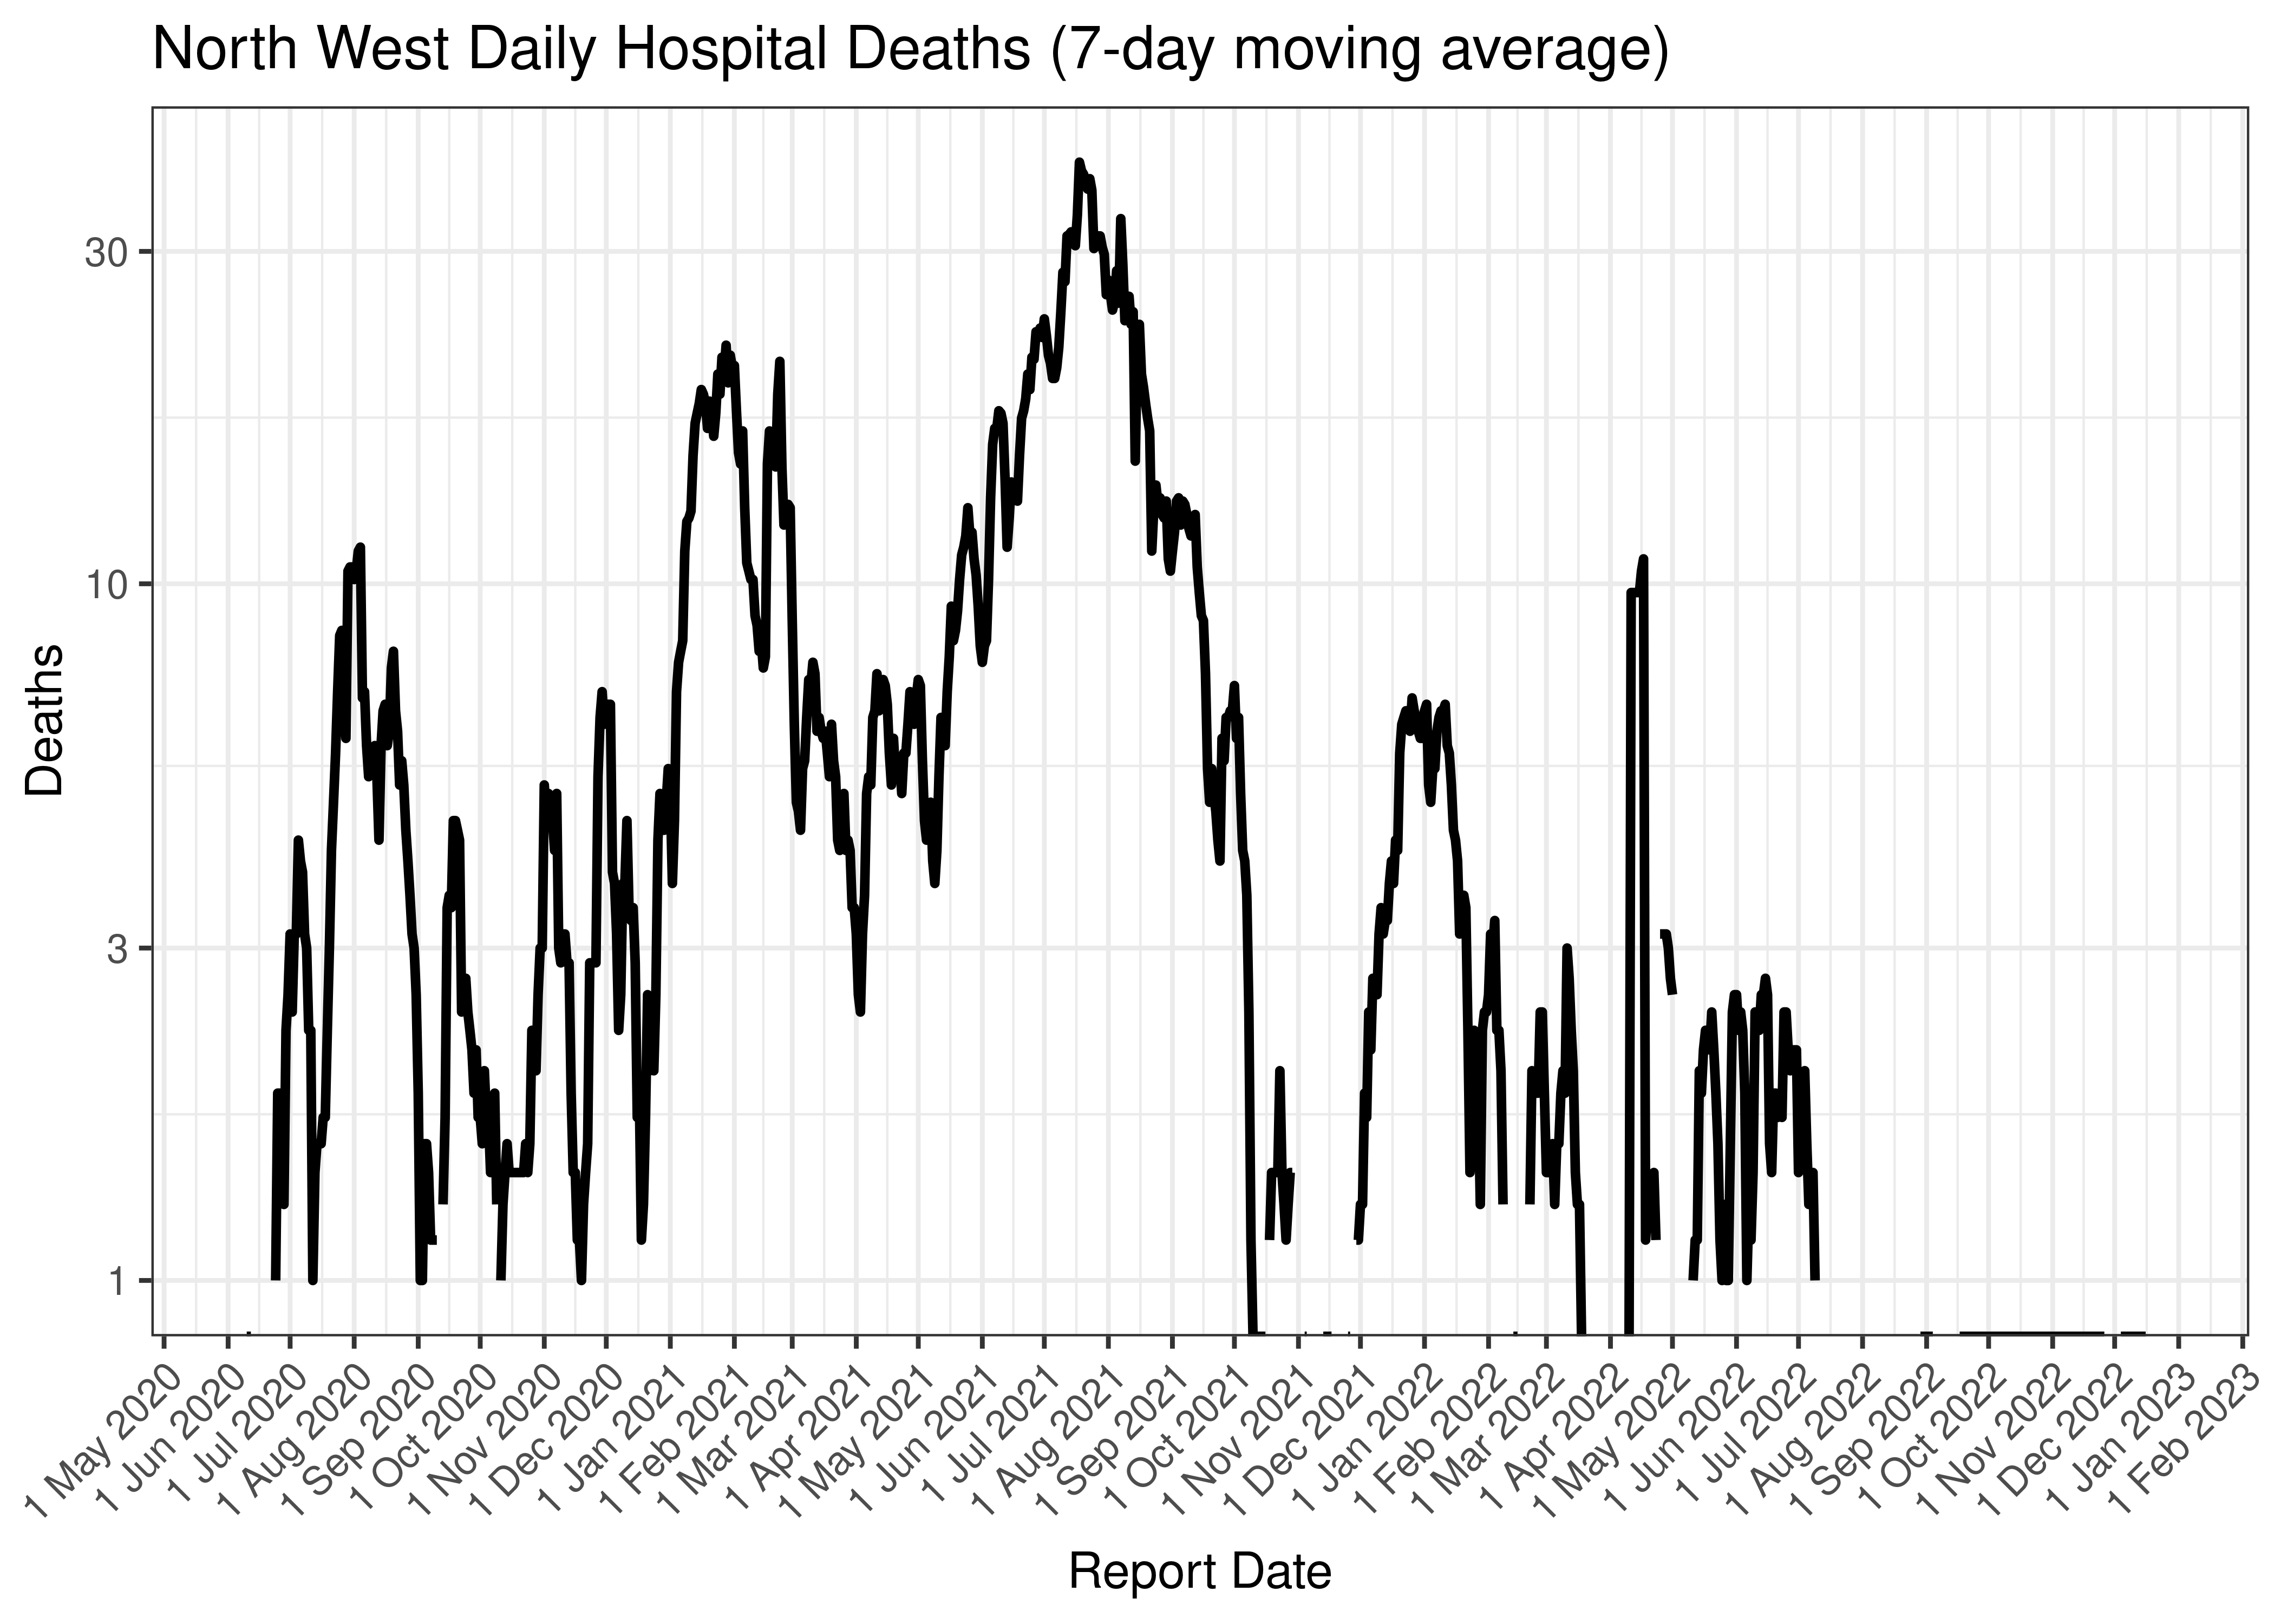 North West Daily Hospital Deaths (7-day moving average)